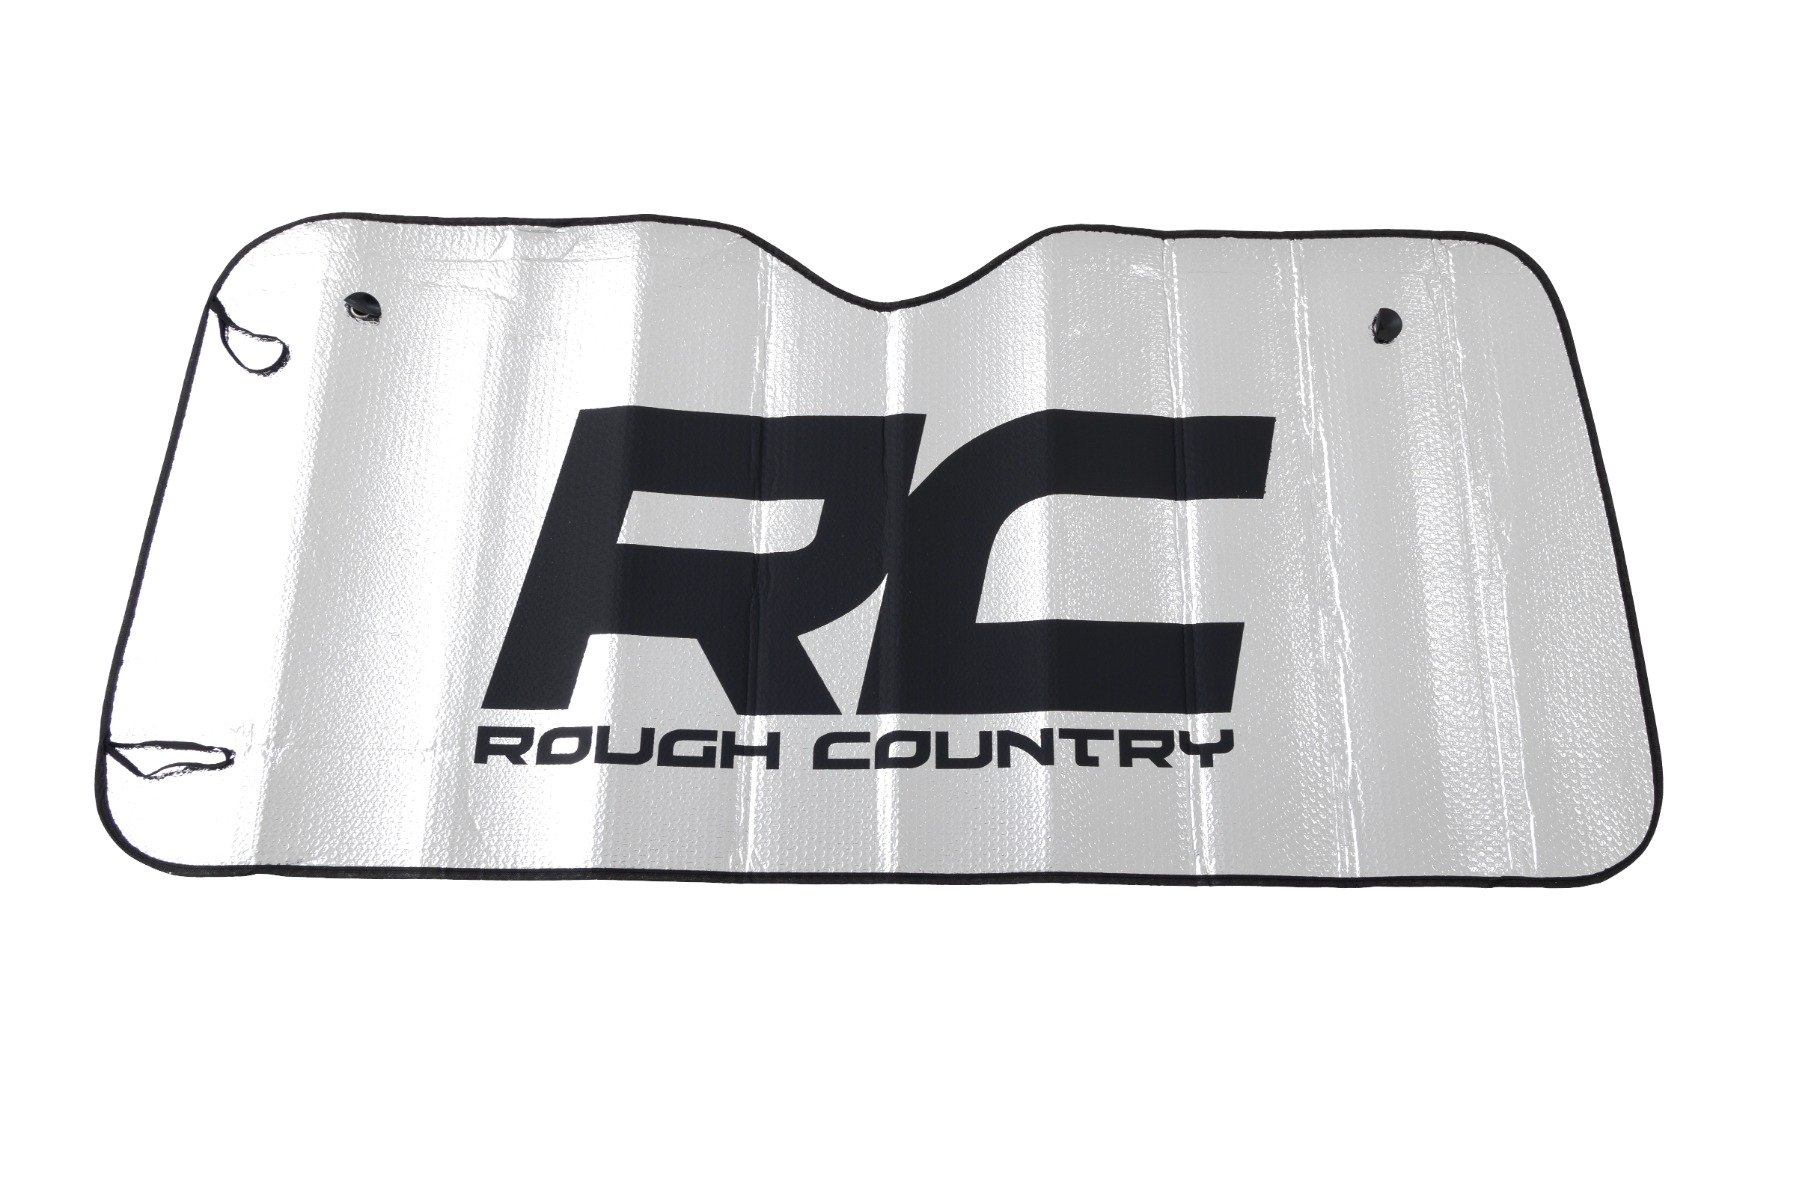 Rough Country Decal